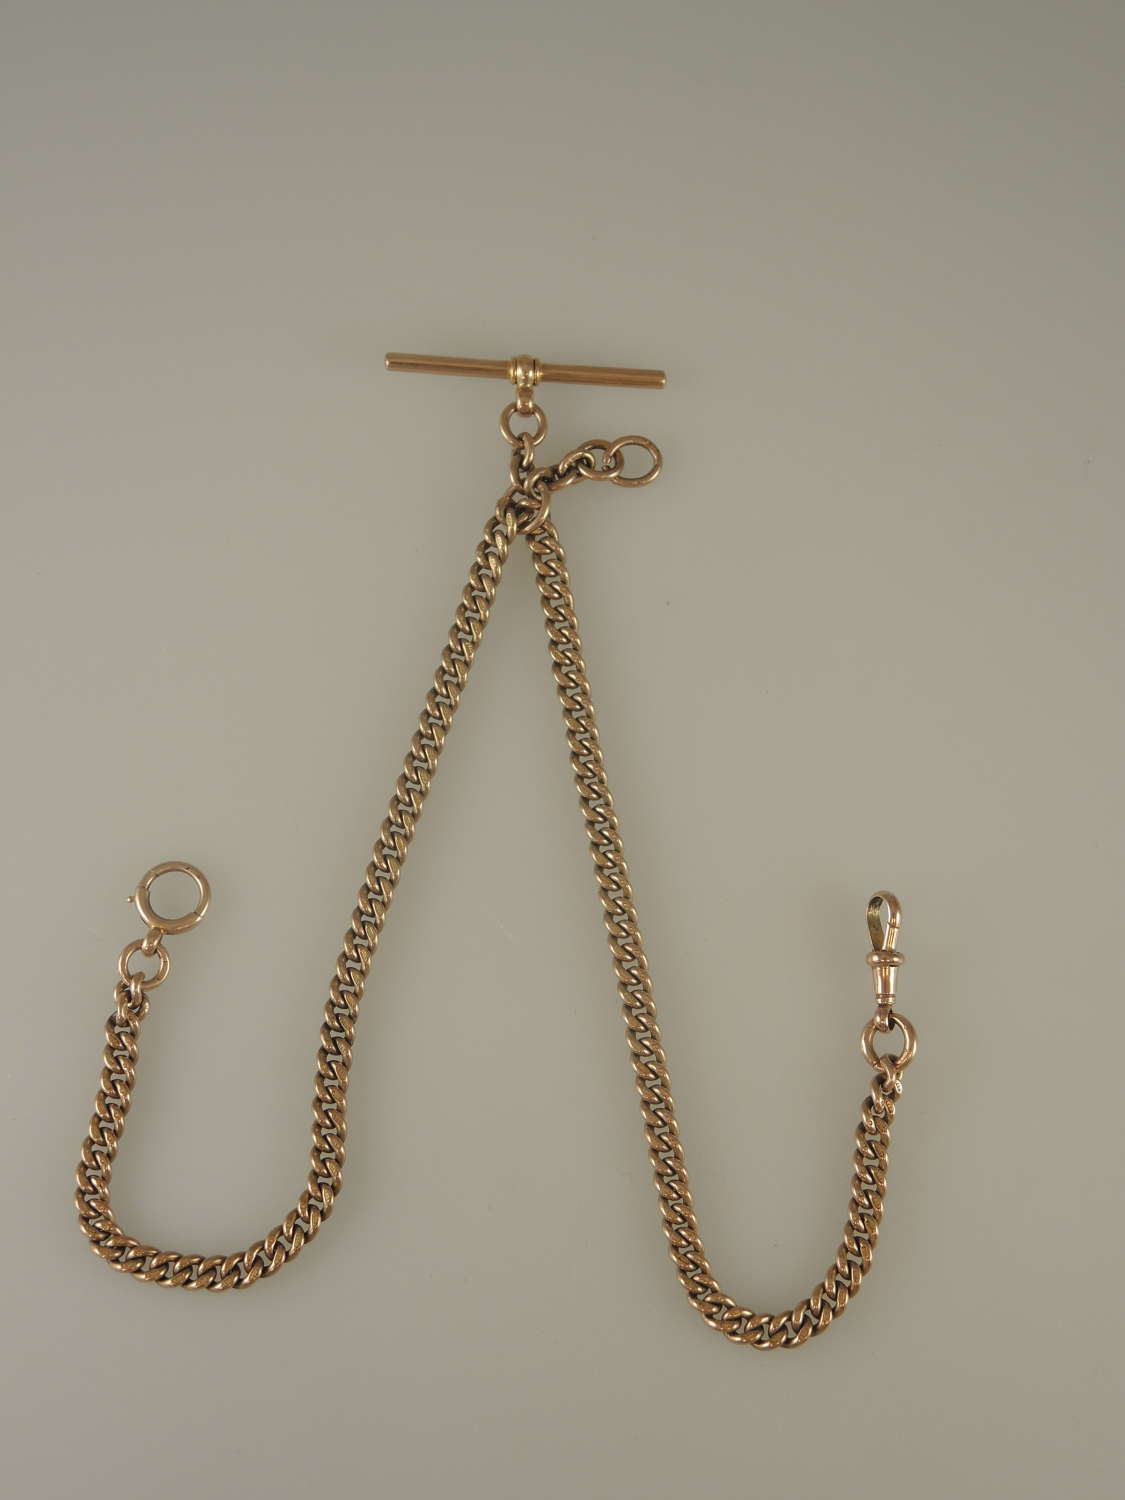 Top quality 9K gold pocket watch chain c1910